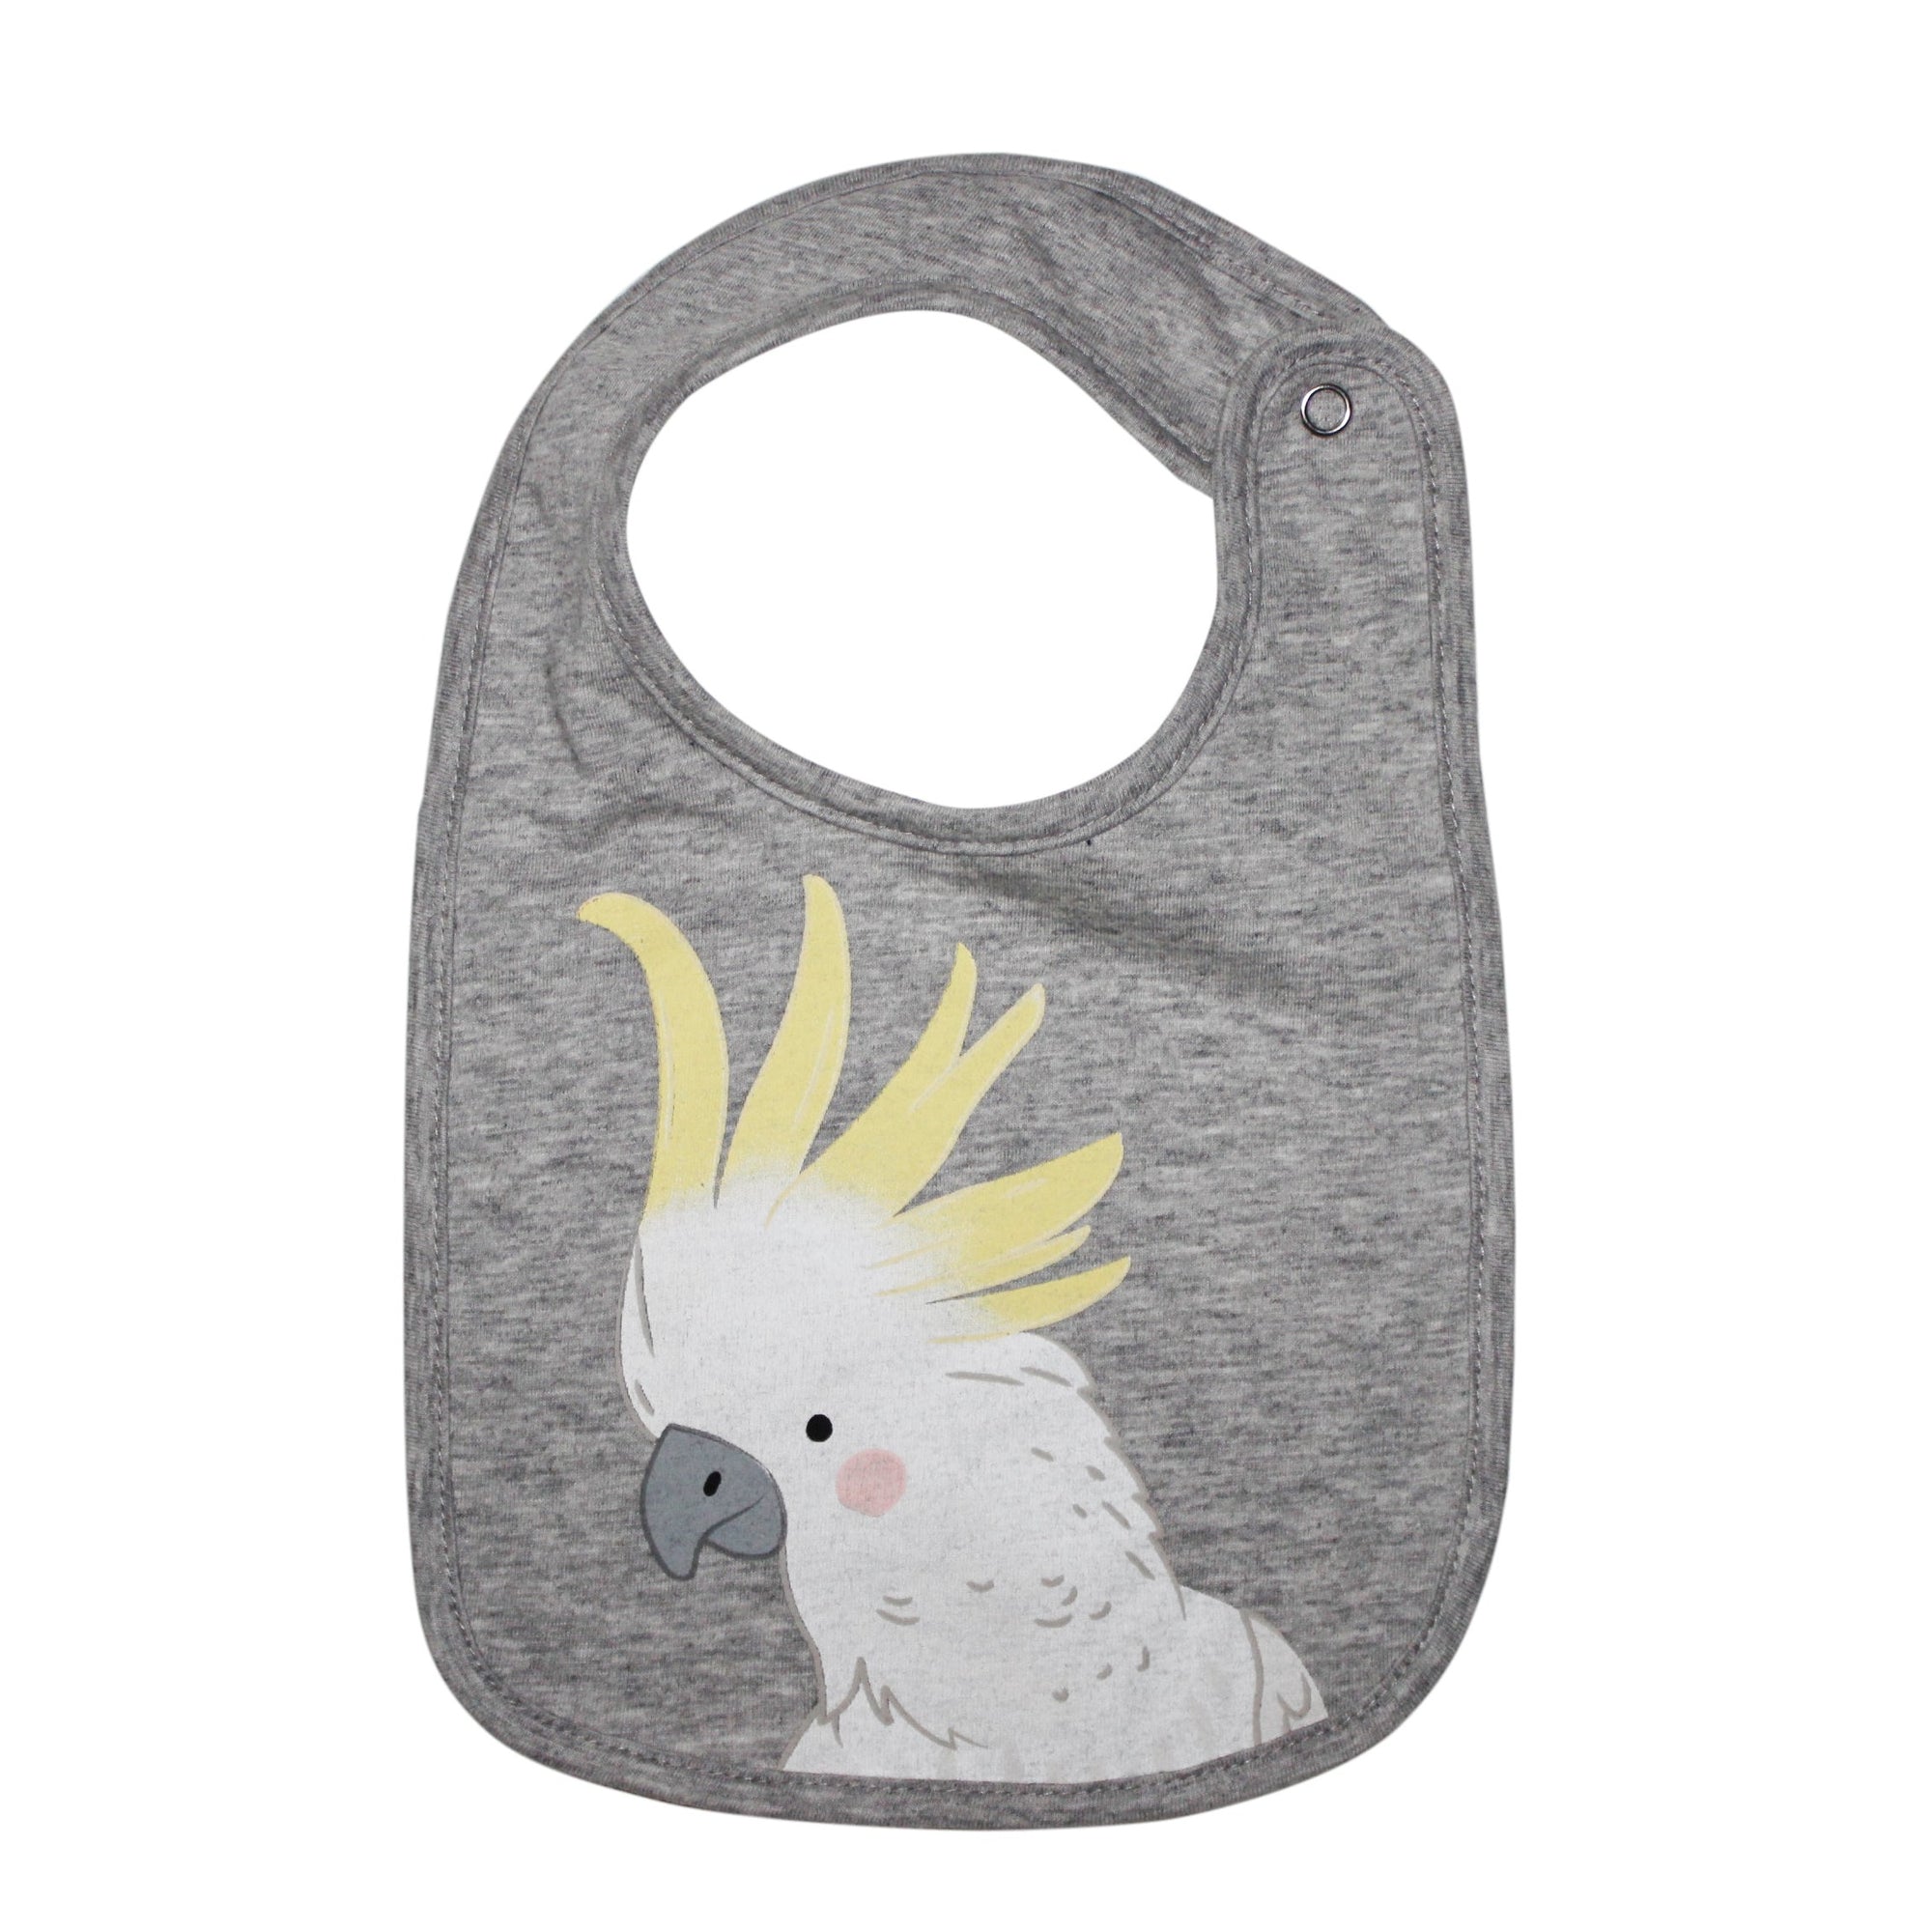 Misterfly face bib cockatoo - Angus and dudley